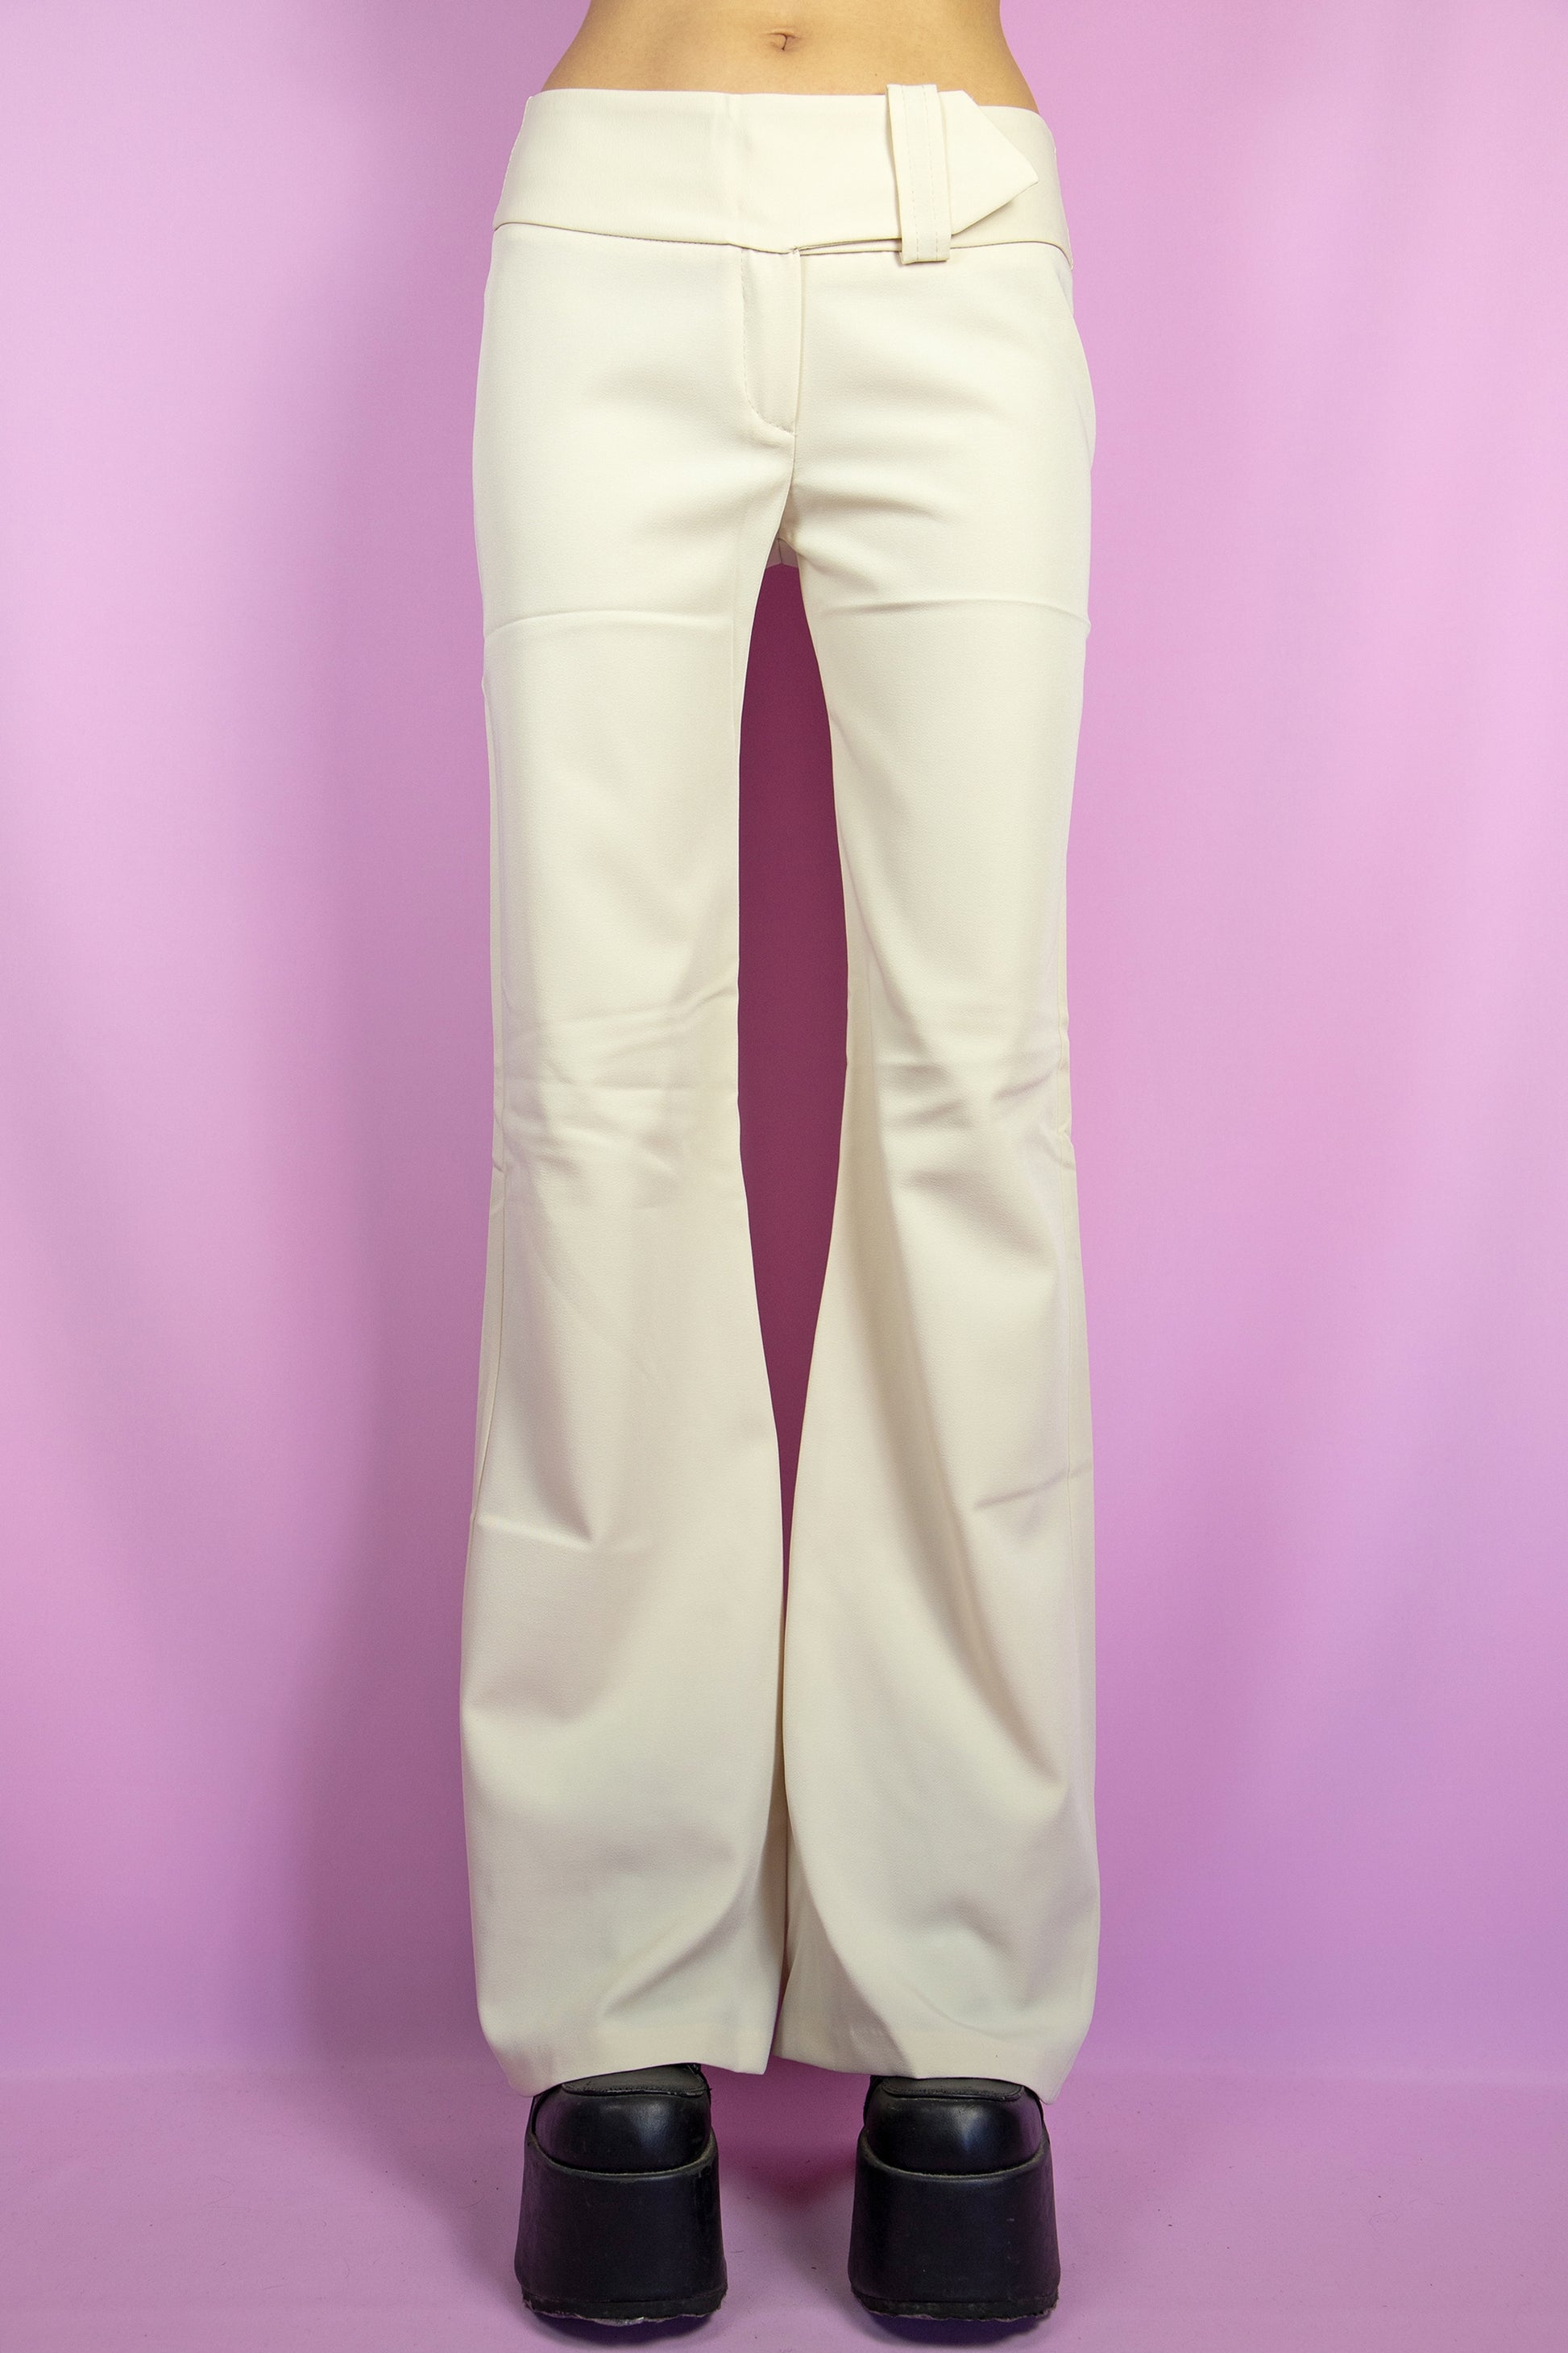 The Y2K Beige Belted Flare Pants are vintage slightly stretchy mid-rise beige flare pants with a belt detail. Cyber 2000s wide pants.